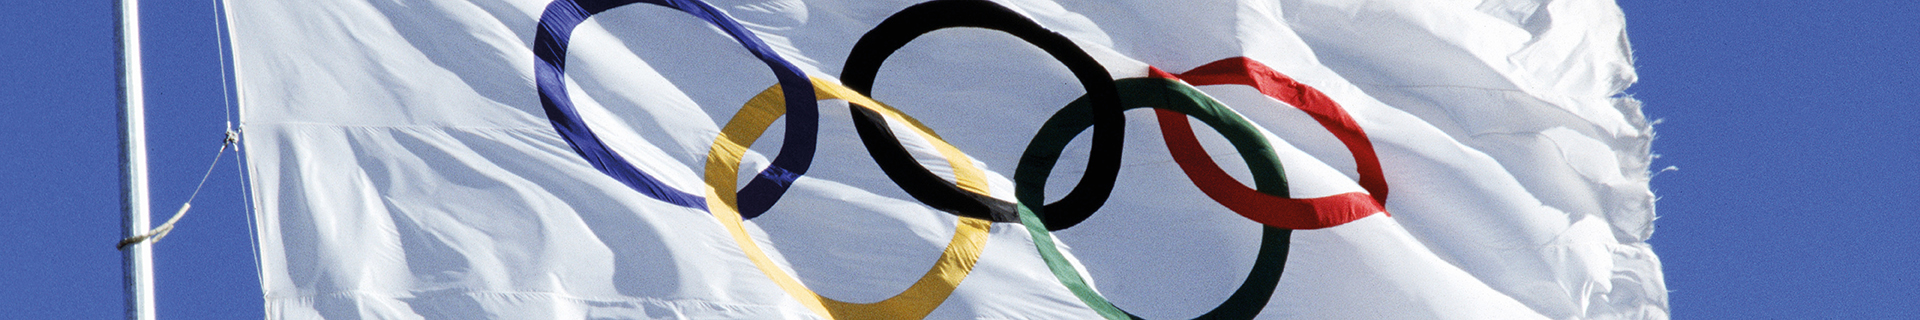 Ensuring strategic risk management for a resilient Olympic games